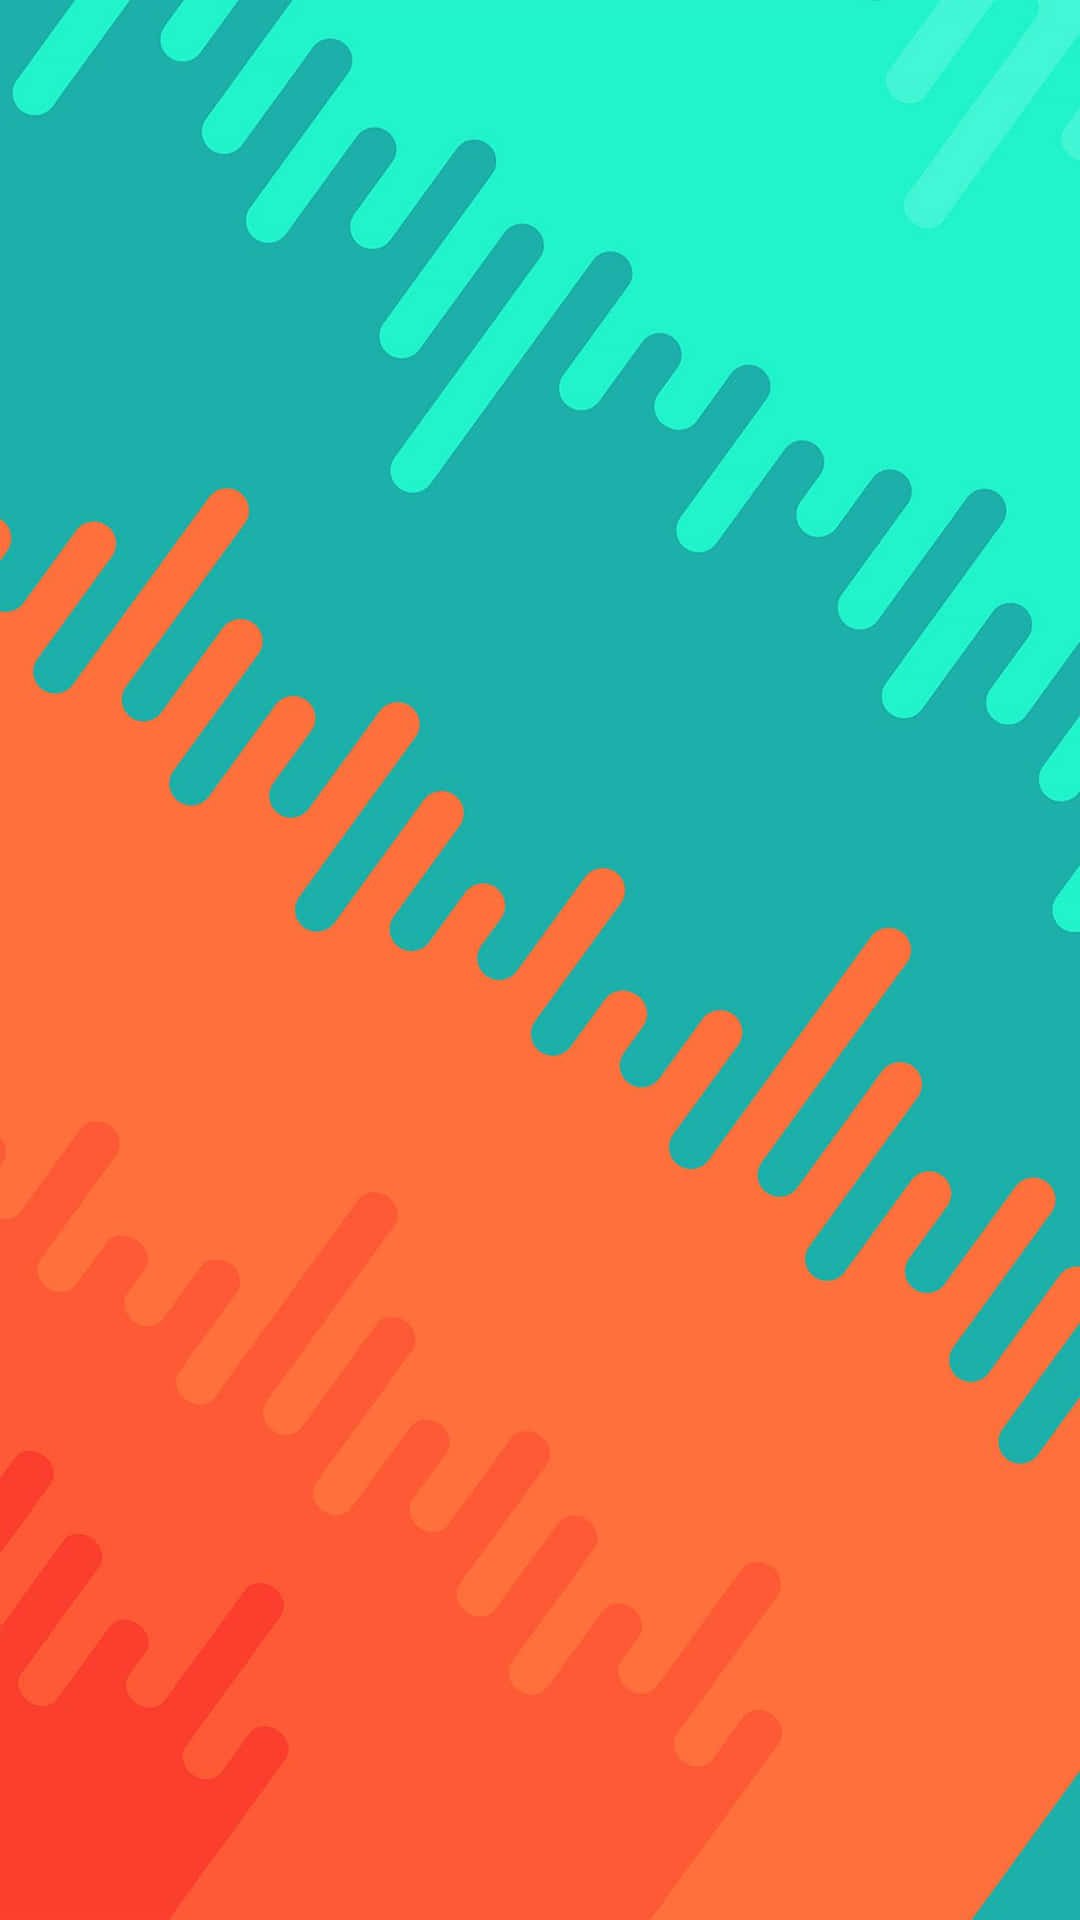 Aesthetic Waves In Orange And Teal Wallpaper